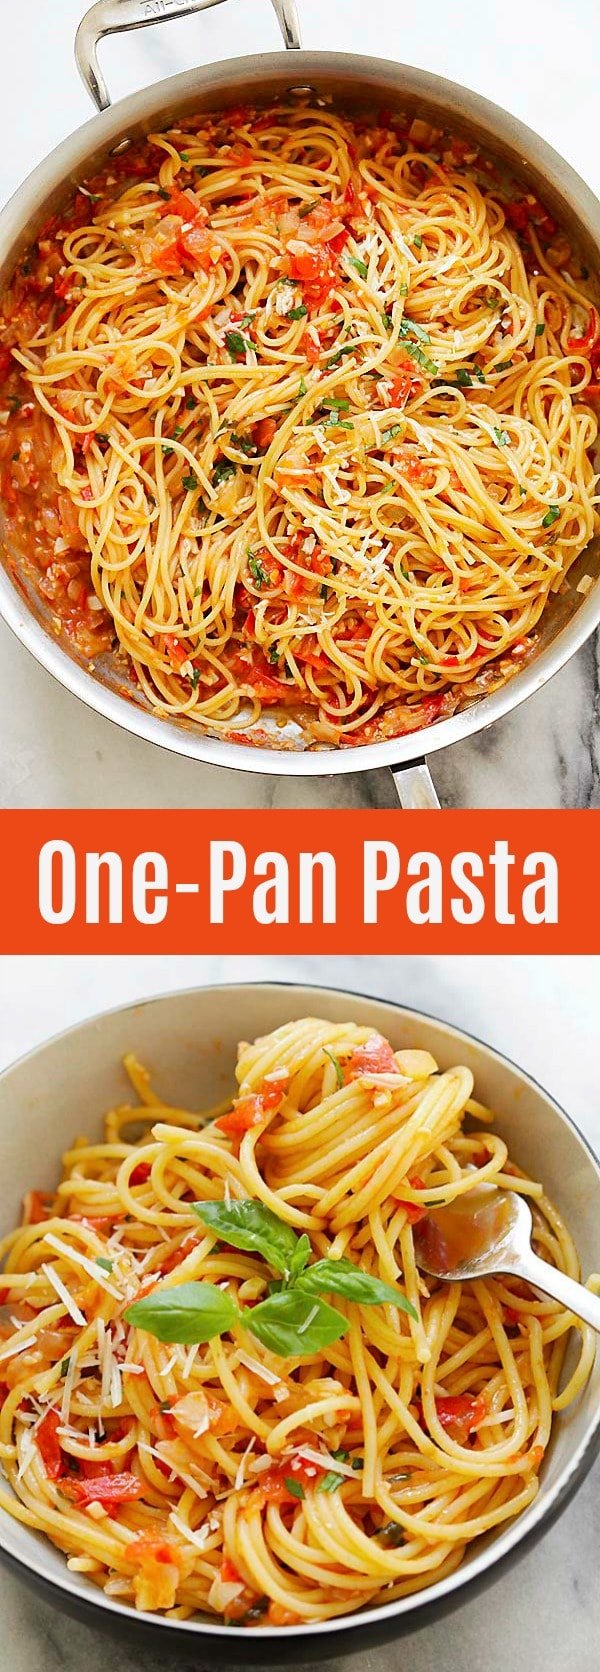 One of the best pasta recipes that takes 20 minutes to make in one pot. Throw all the ingredients in a pot or pan and dinner is ready for the entire family | rasamalaysia.com